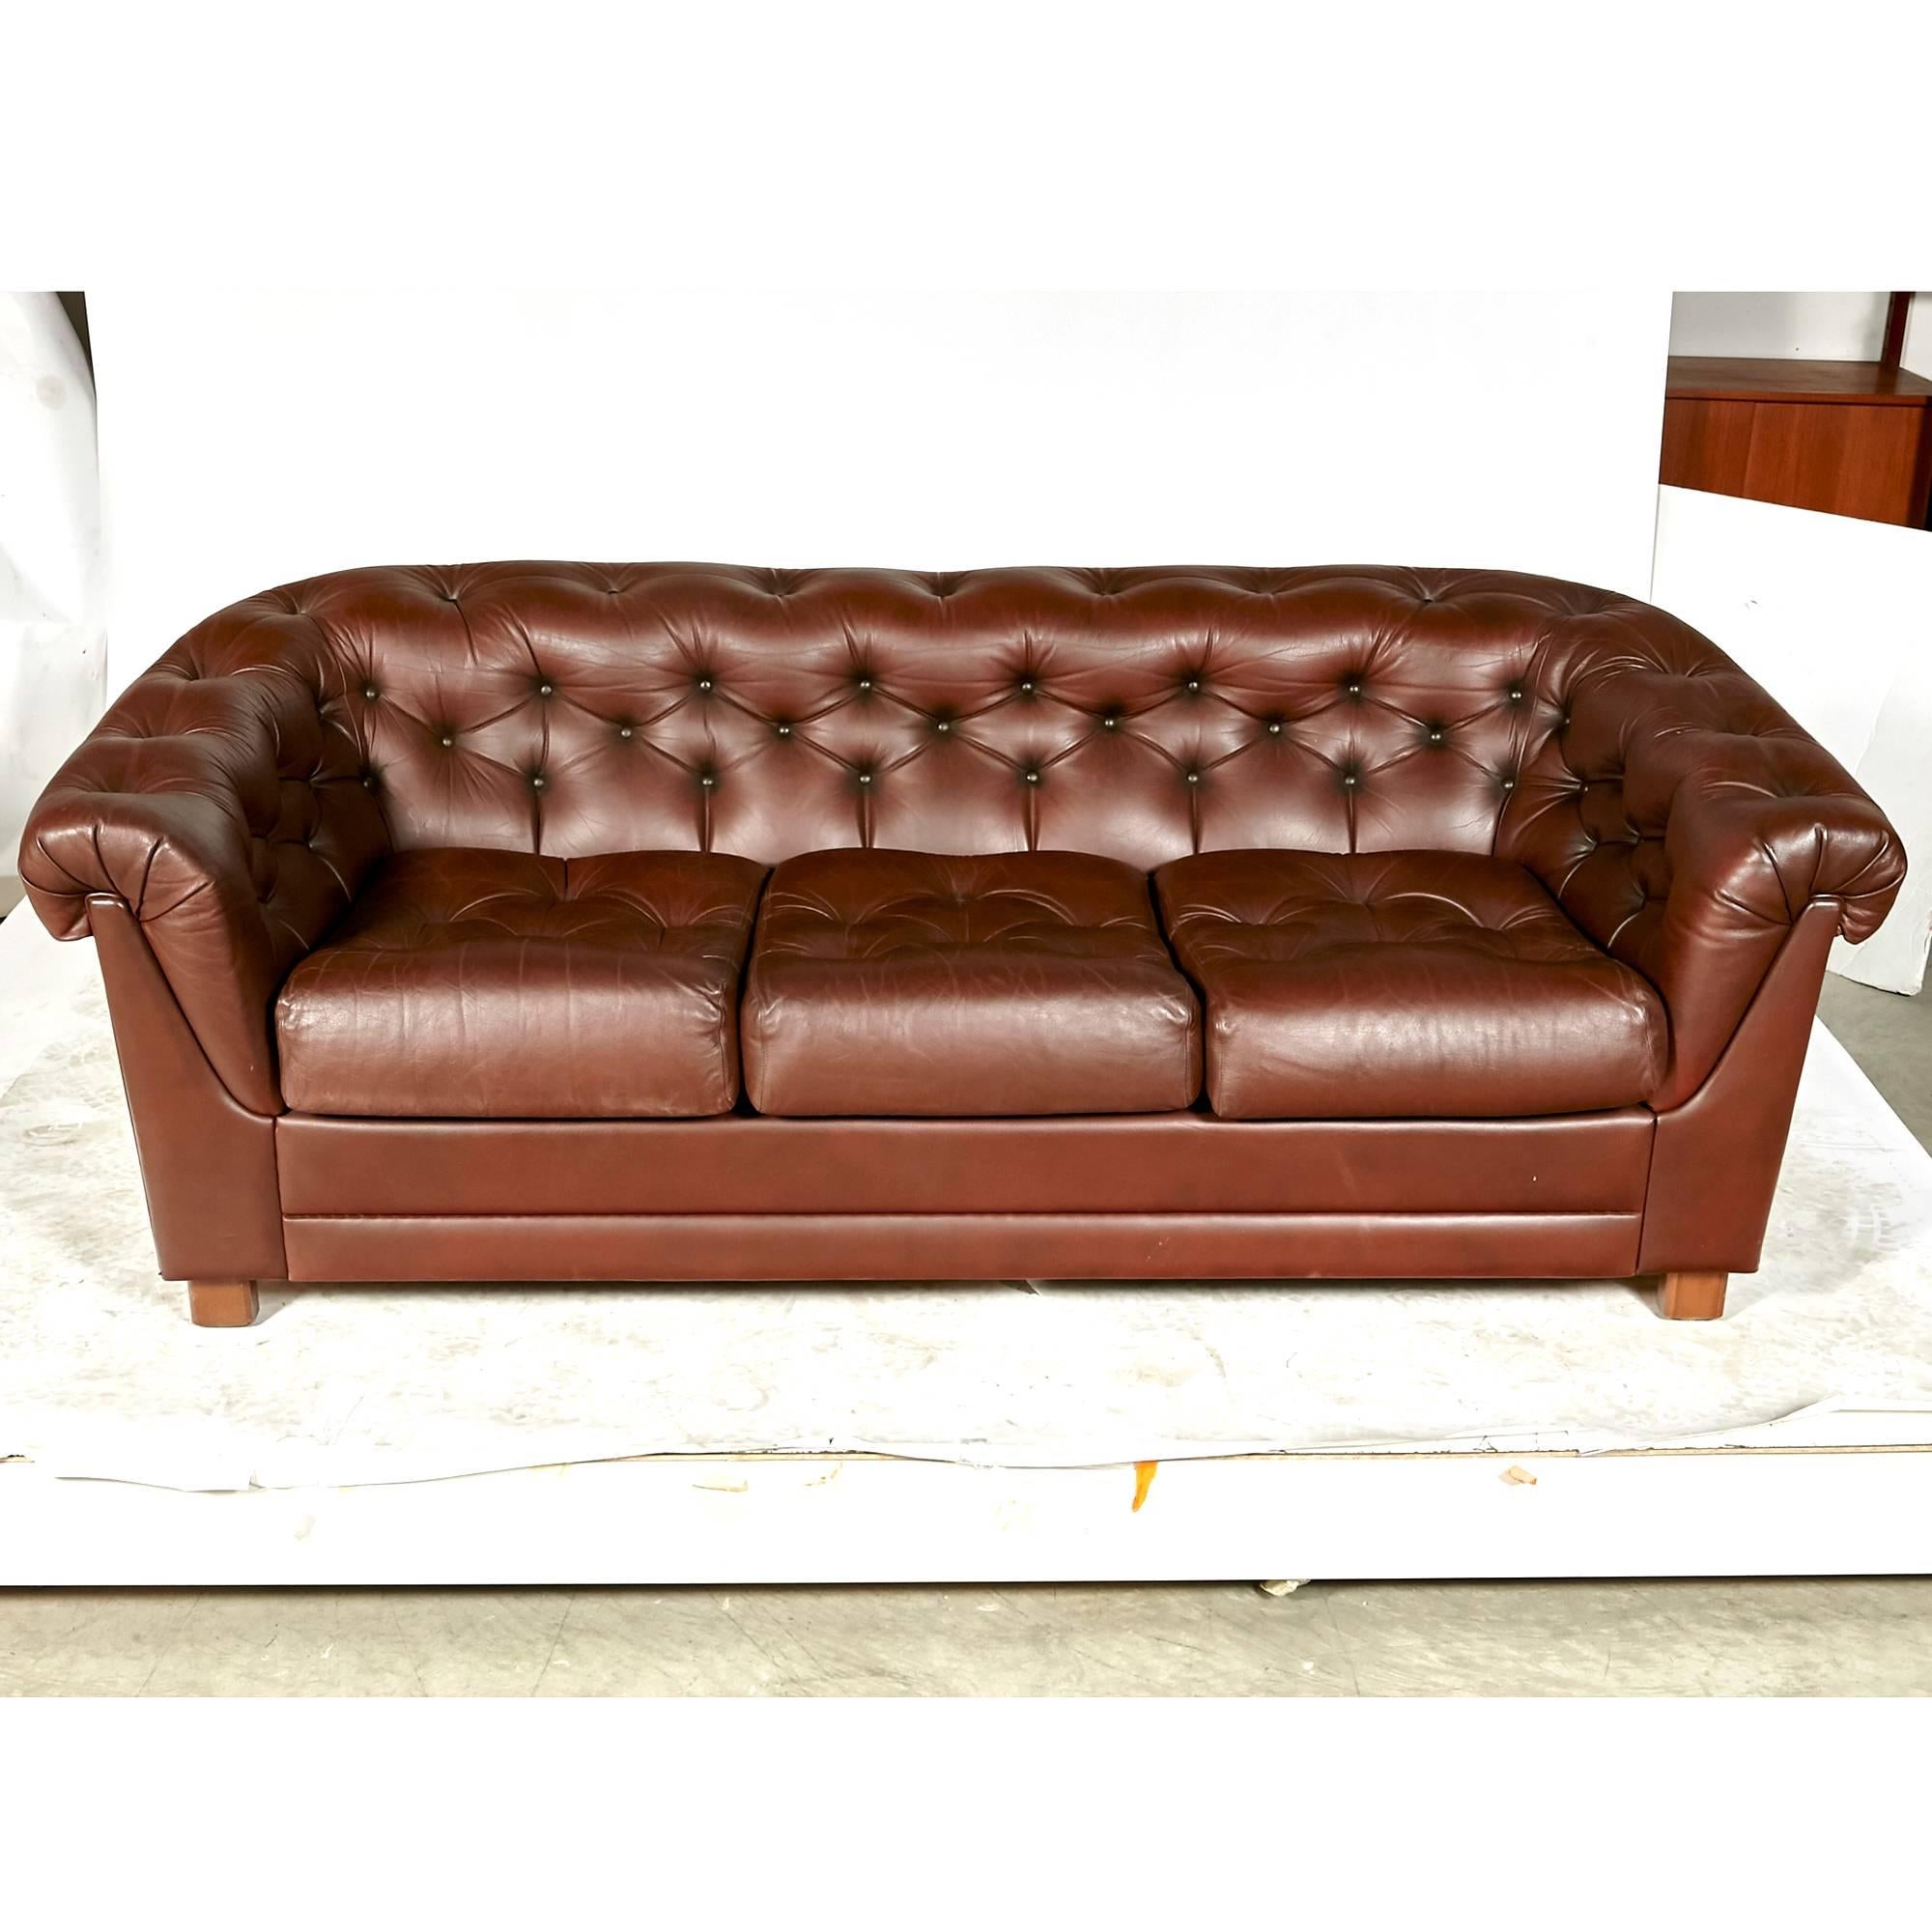 Late 20th century brown leather three-seat Chesterfield sofa with solid wood frame. Arm 24in.H. No maker's mark.


  